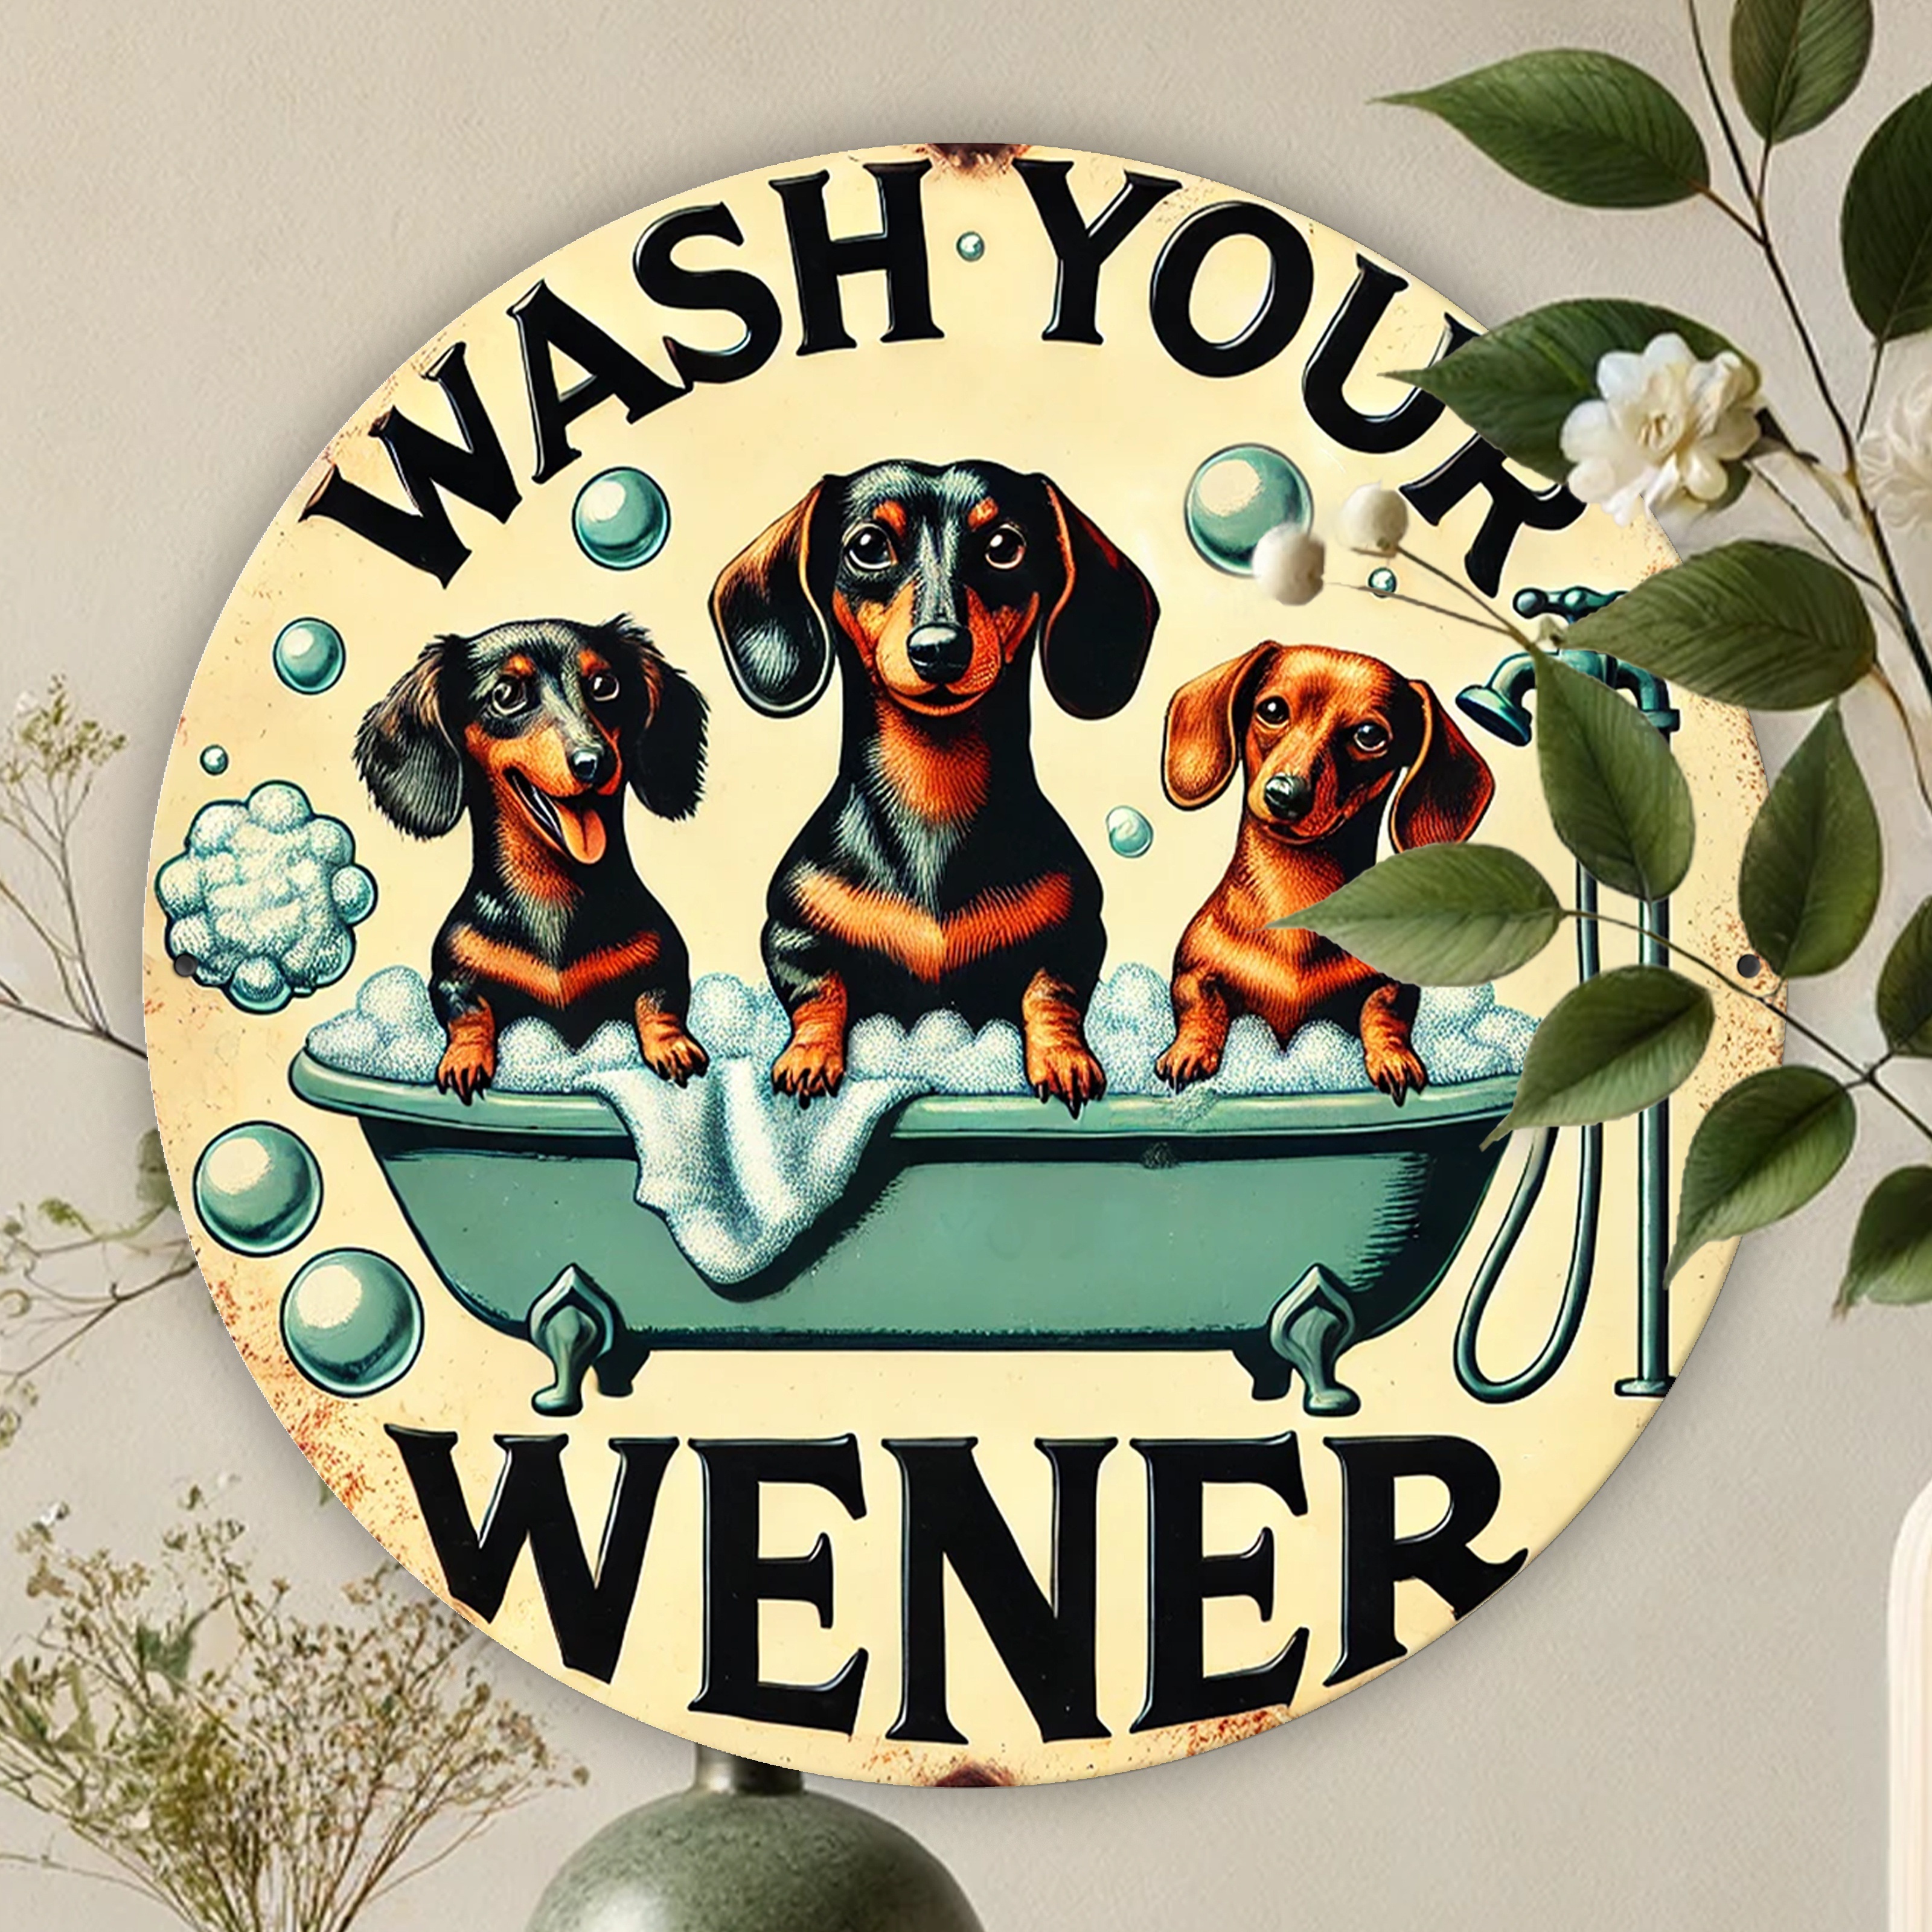 

Wash Your Wiener" Dachshund Metal Sign - 7.8x7.8 Inch Round, Perfect Gift For Dog Lovers & Women, Ideal For Home, Garden, Patio & Bar Decor, Pre-drilled For Easy Hanging